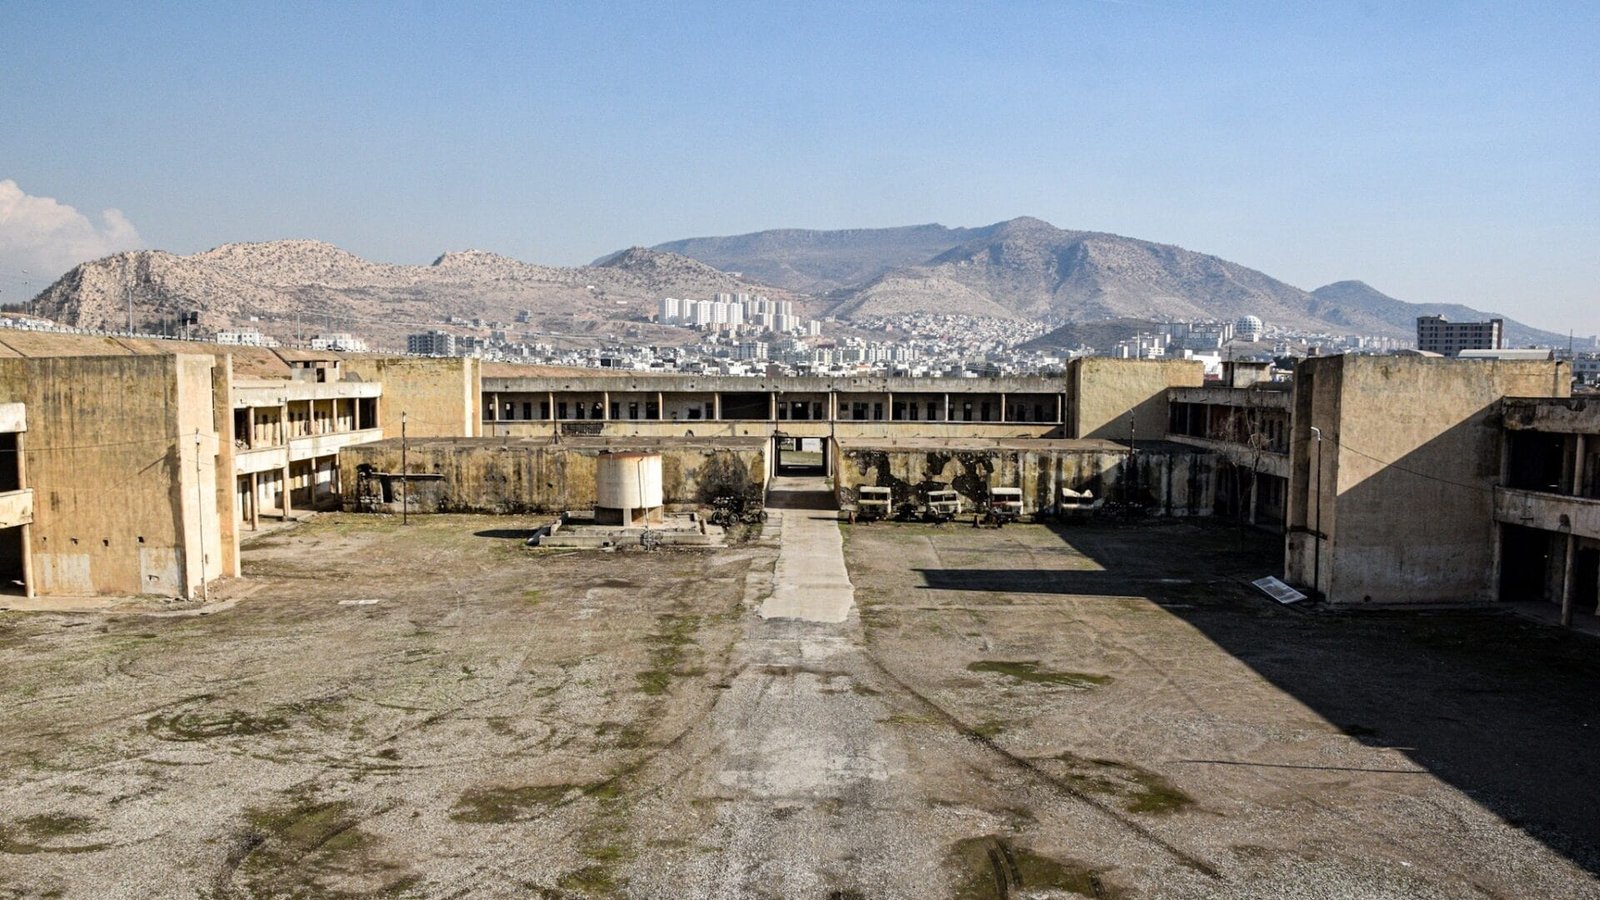 panorama view of the inner courtyard of an abandoned Iraqi prison